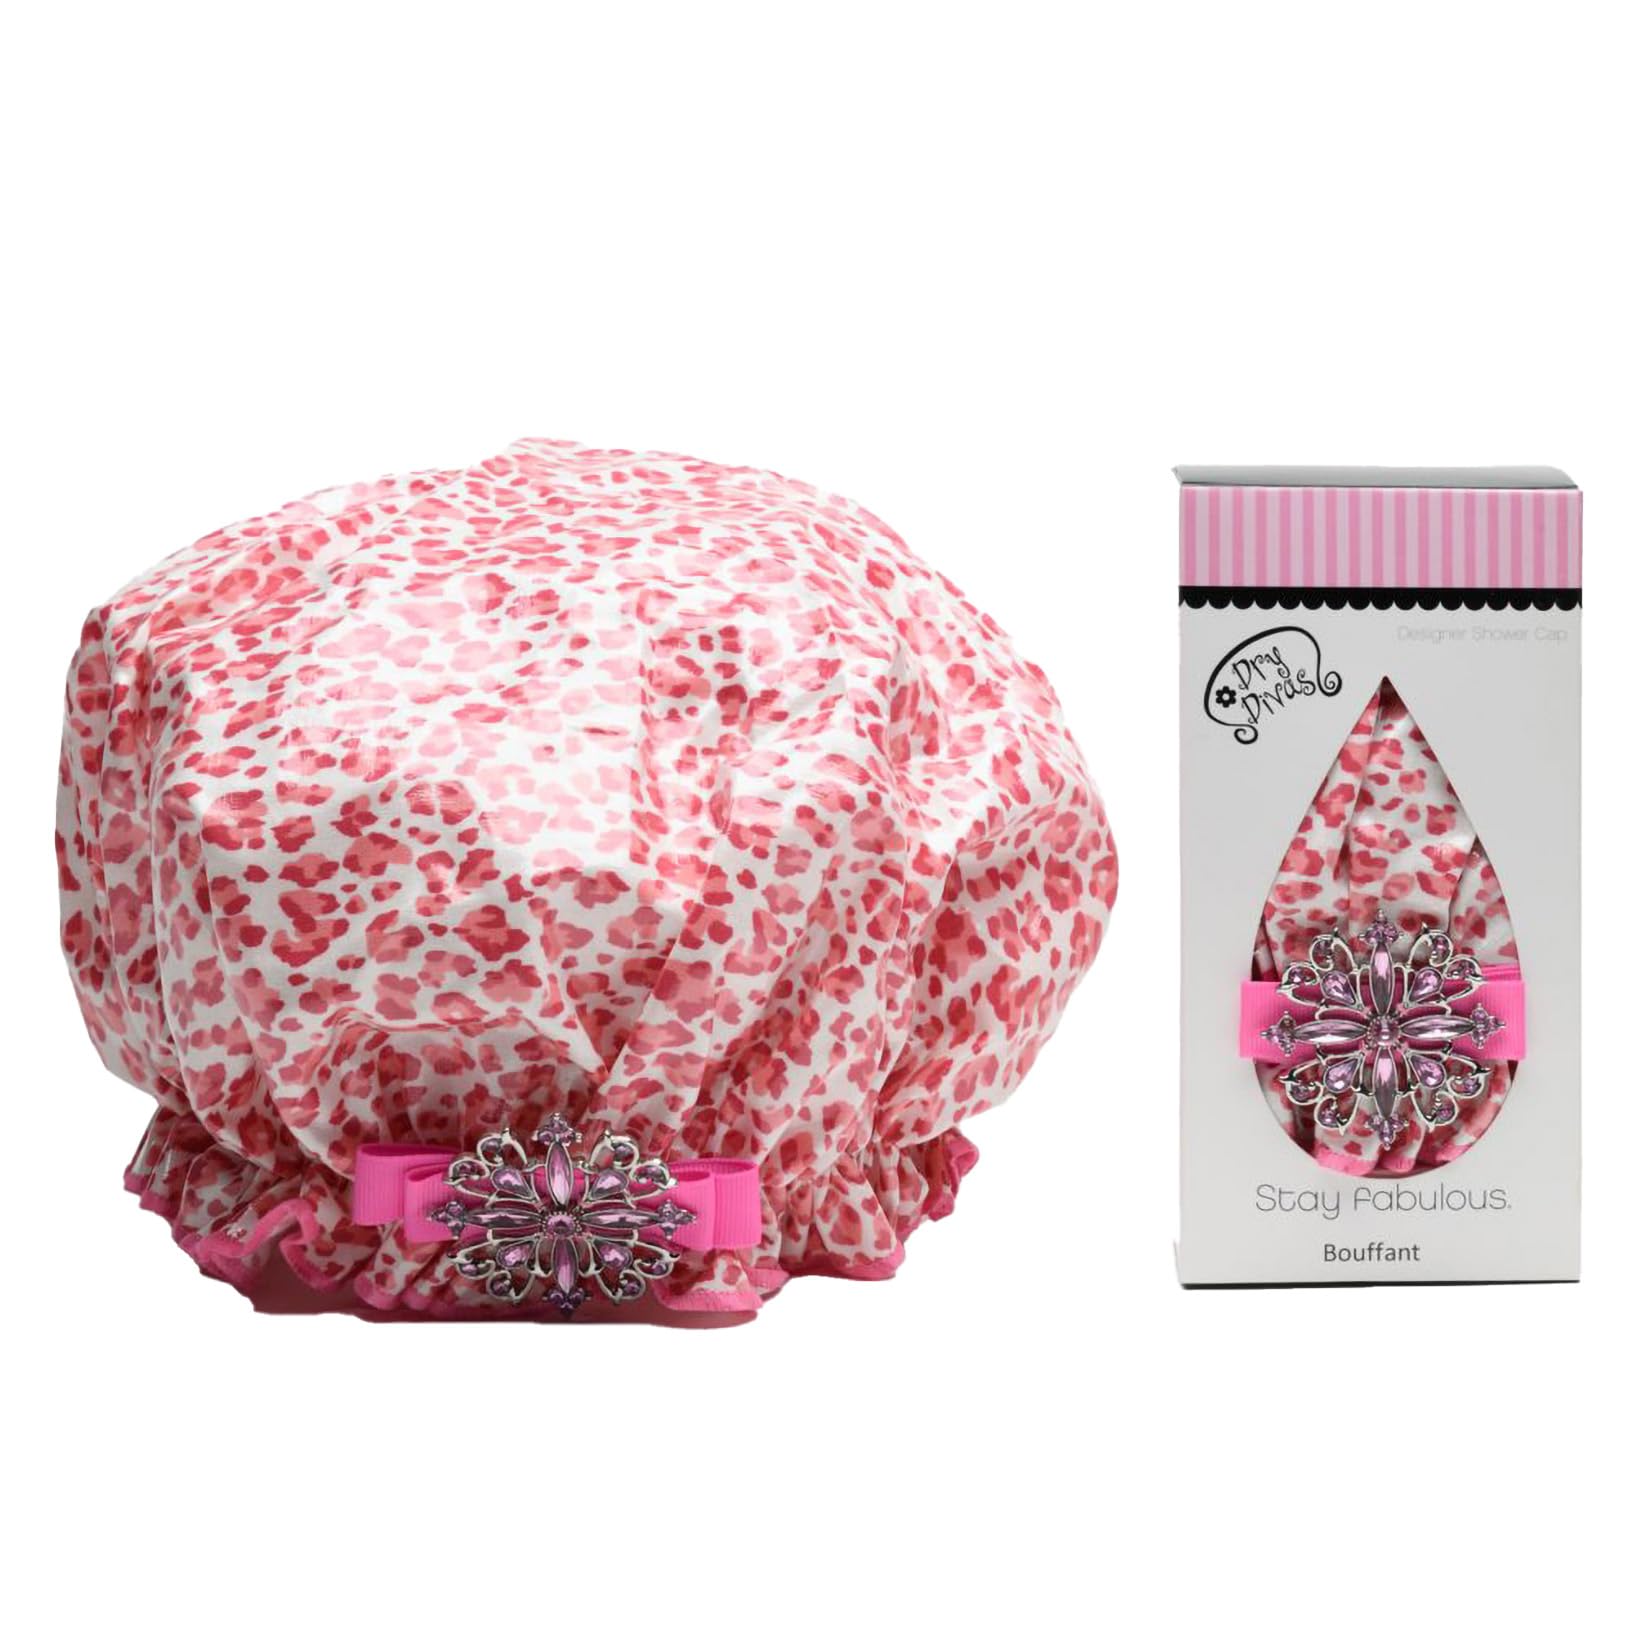 Dry Divas Designer Shower Cap For Women - Washable, Reusable - Large Bouffant Cap With Vintage Jeweled Brooch (Cheetah-licious)